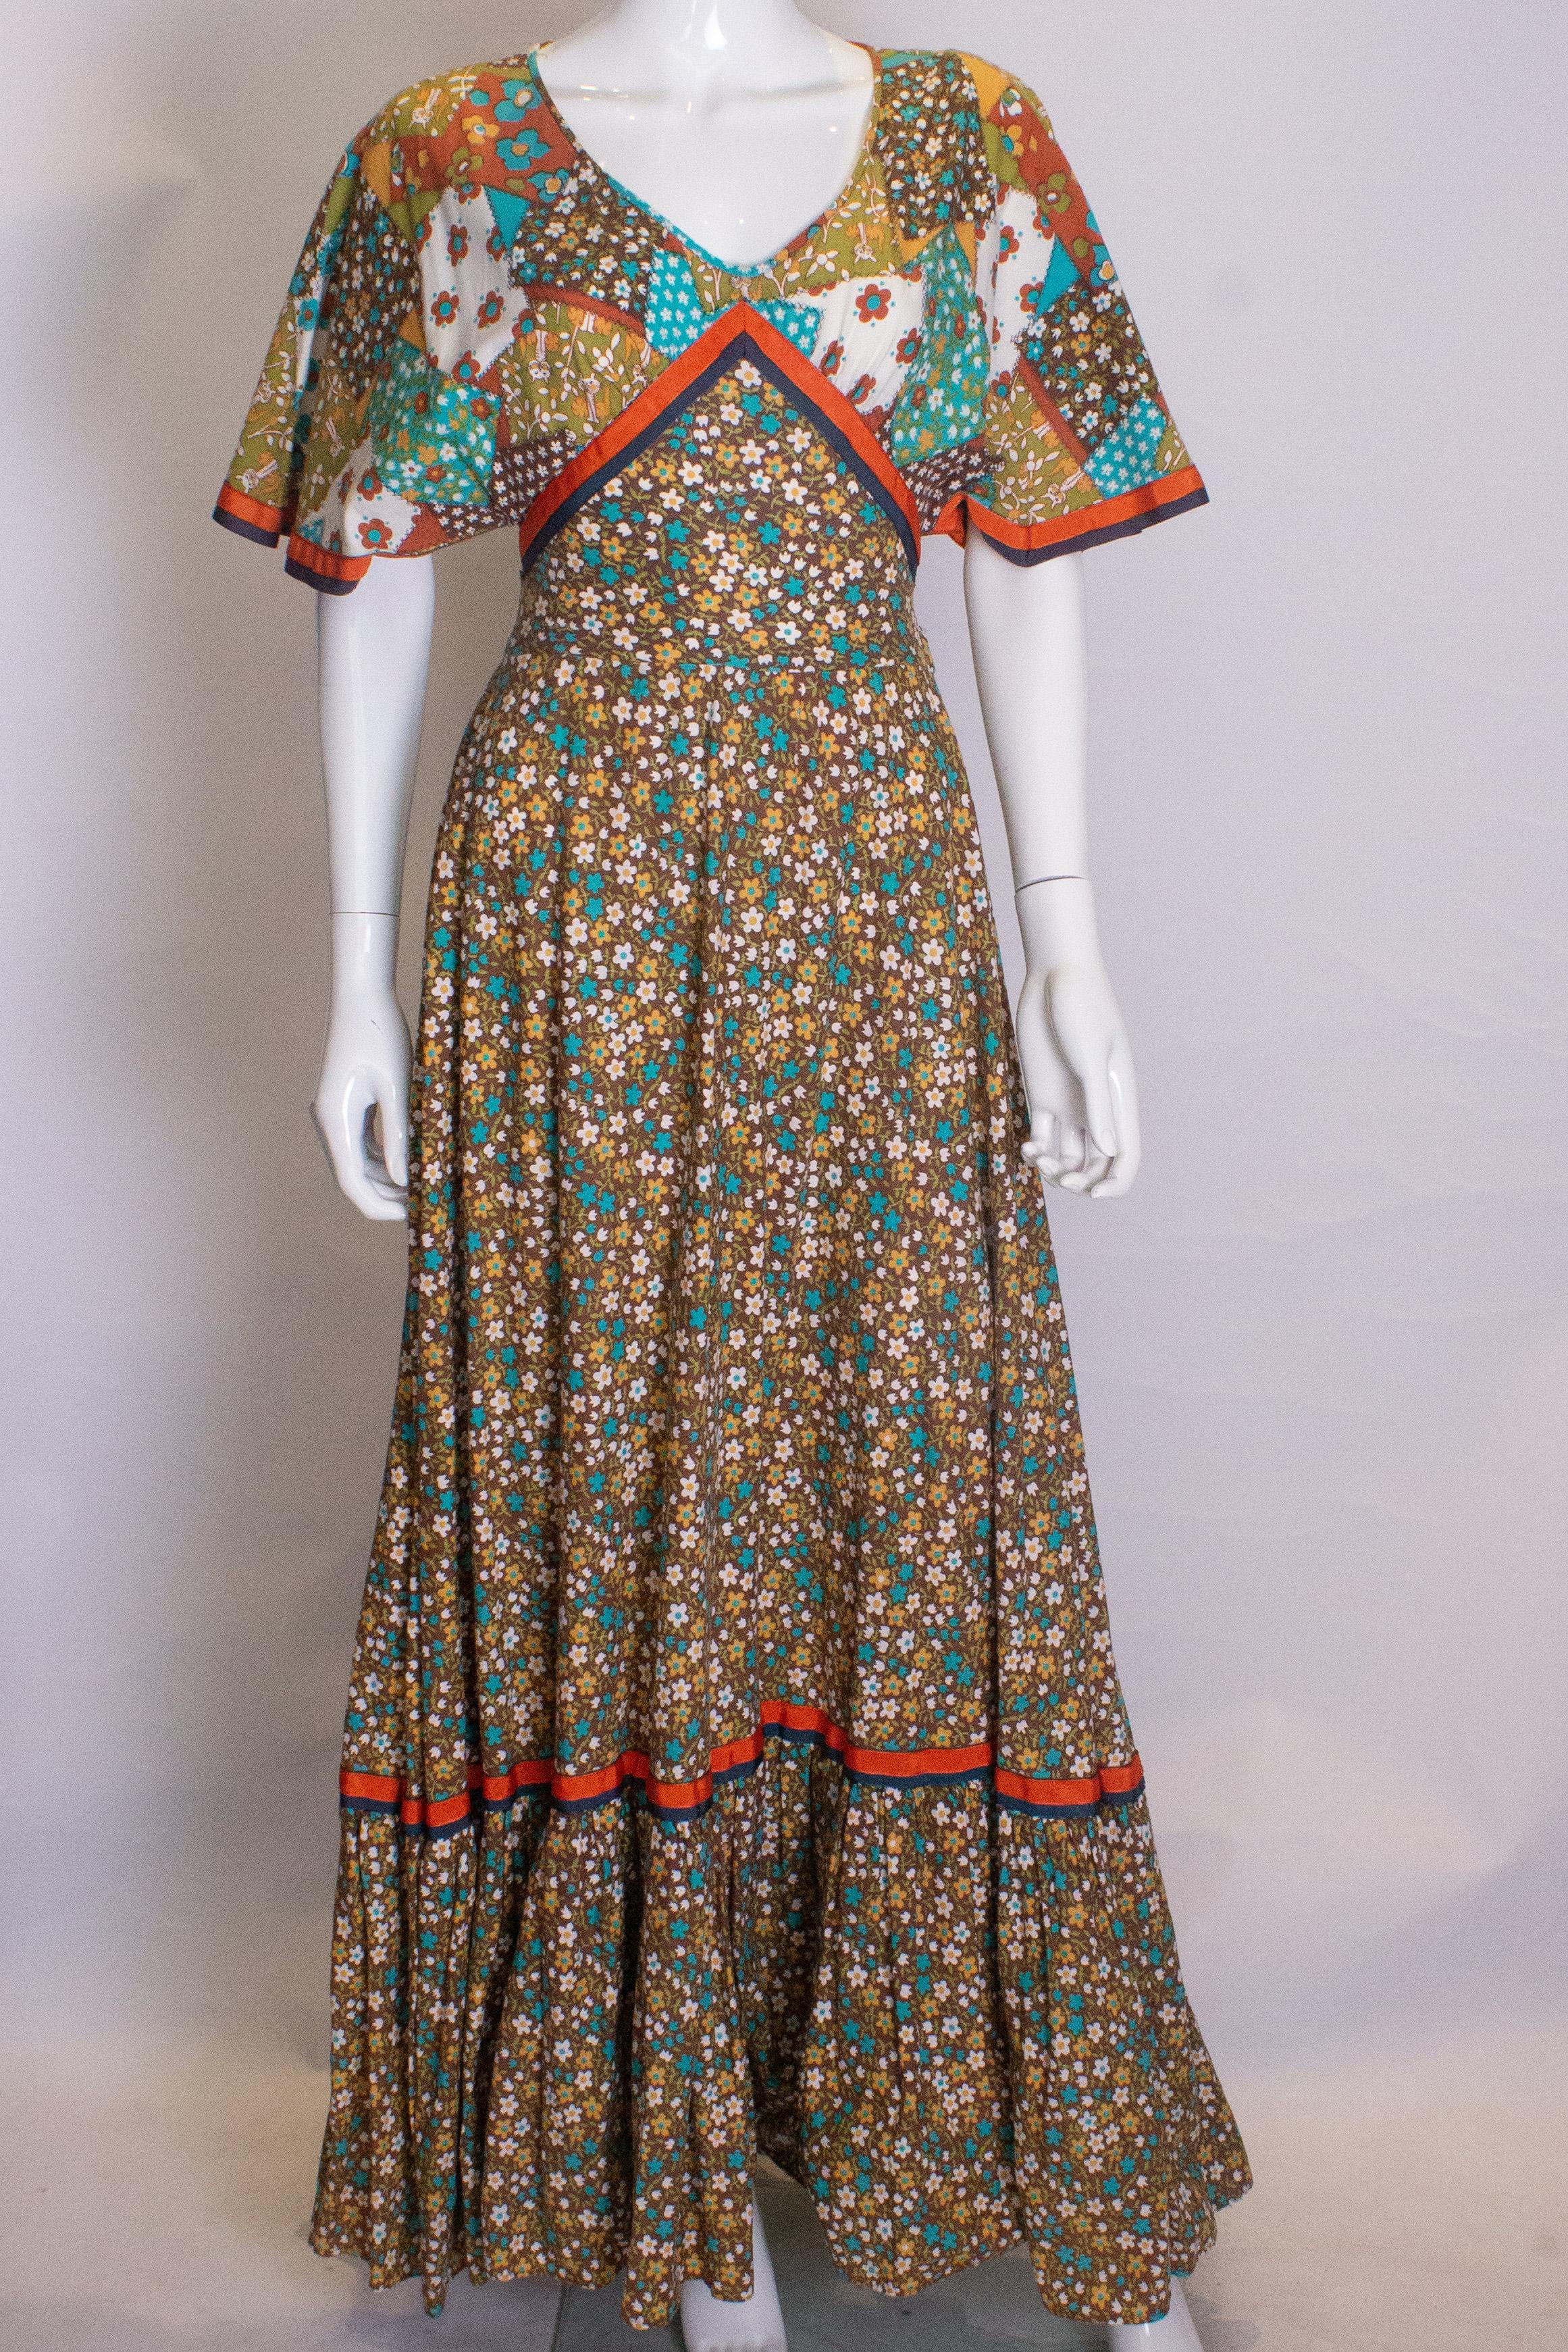 A fun vintage gown by Susan Small.The dress is in a colourful patchwork print, and has a v neckline, cap sleeves, a self fabric tie belt, frill at the hem, and a central back zip.